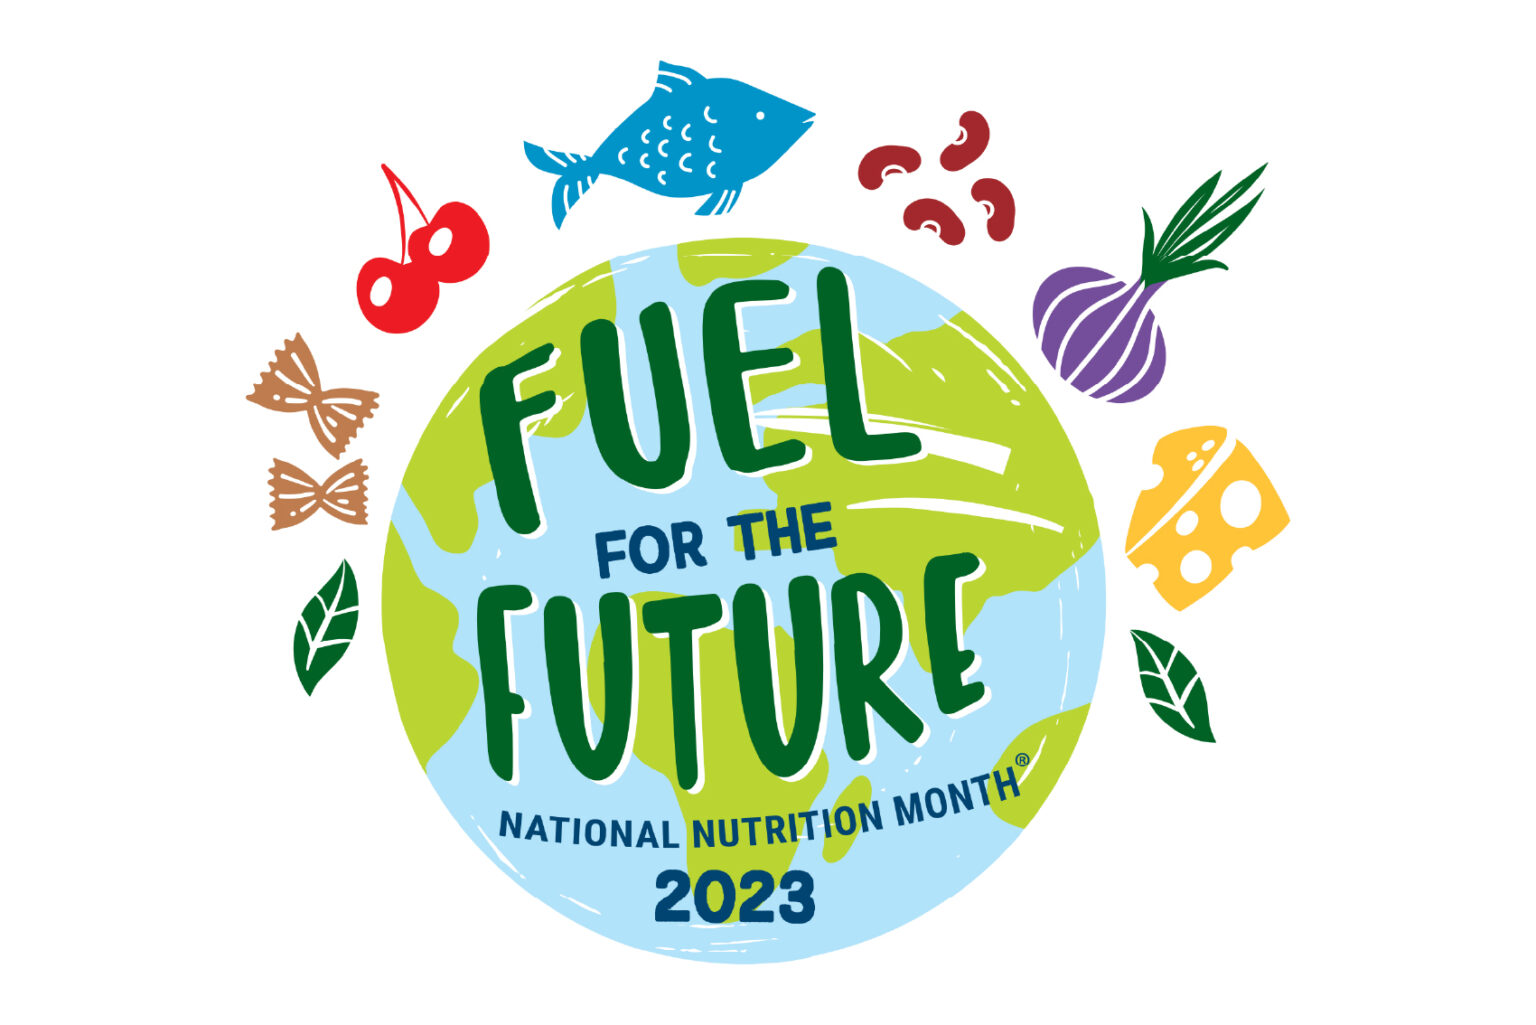 National Nutrition Month 2023 graphic